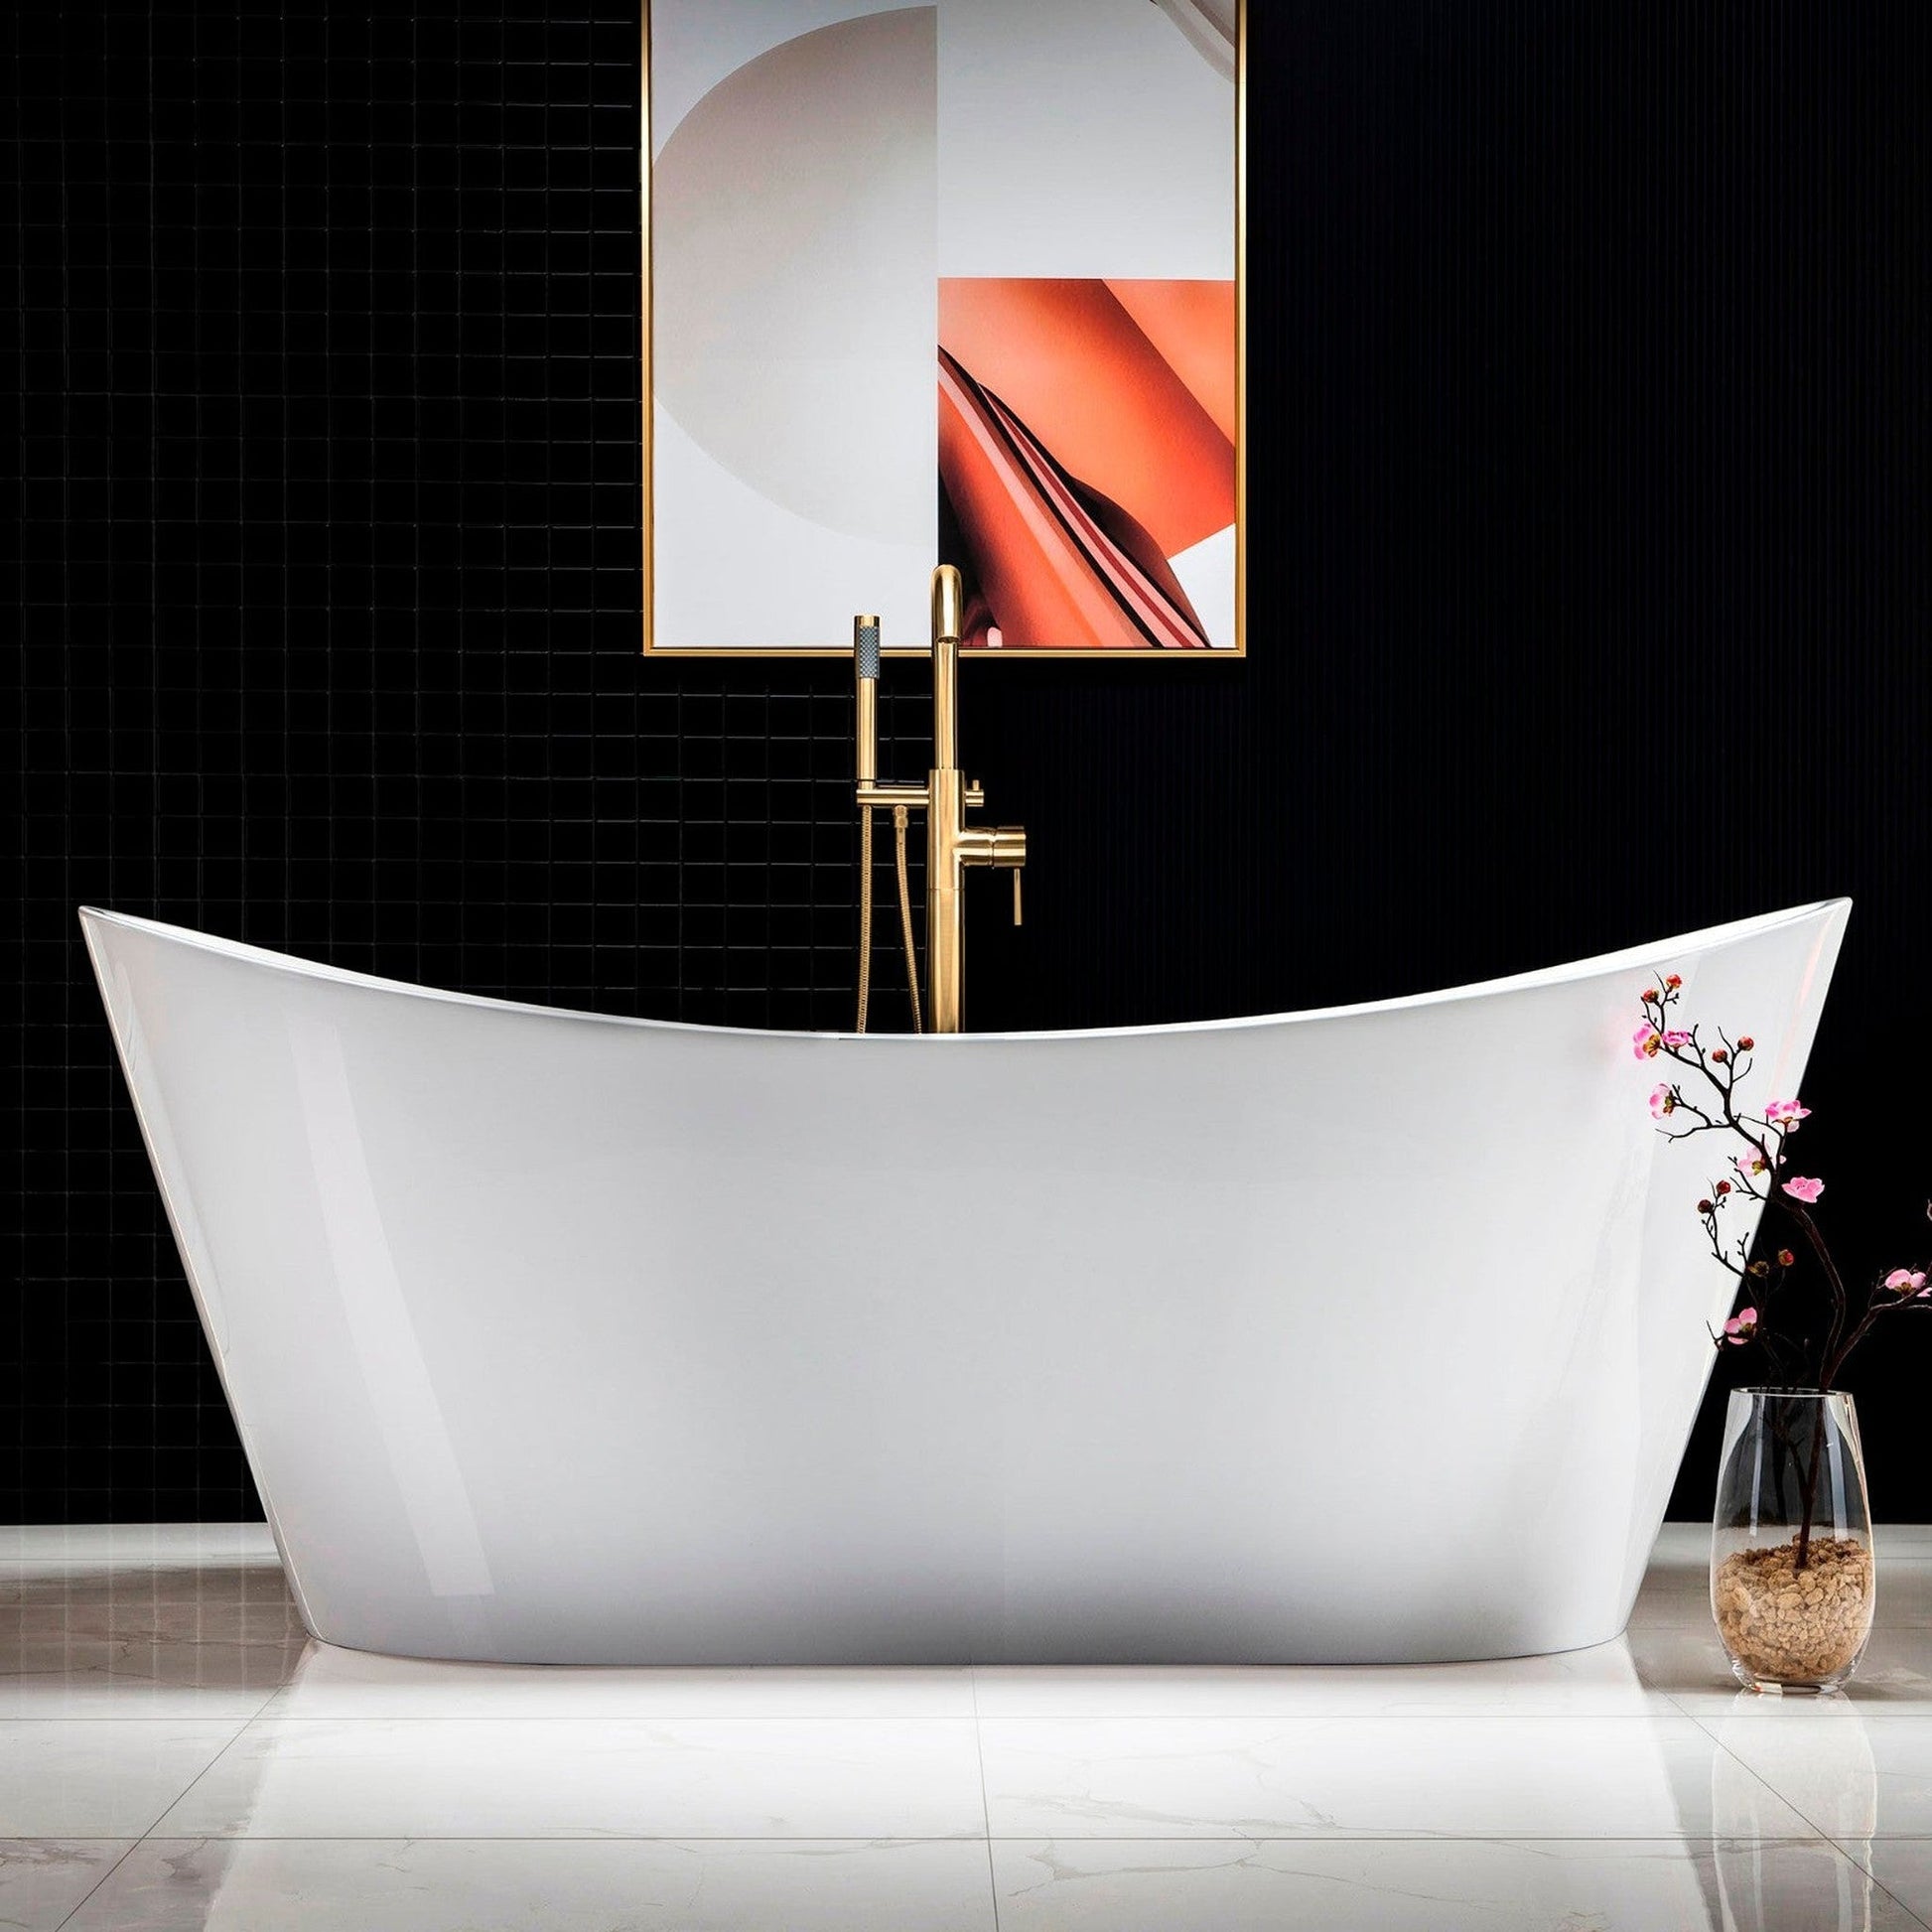 WoodBridge B0017 71" White Acrylic Freestanding Soaking Bathtub With Brushed Gold Drain, Overflow, F0073BGVT Tub Filler and Caddy Tray